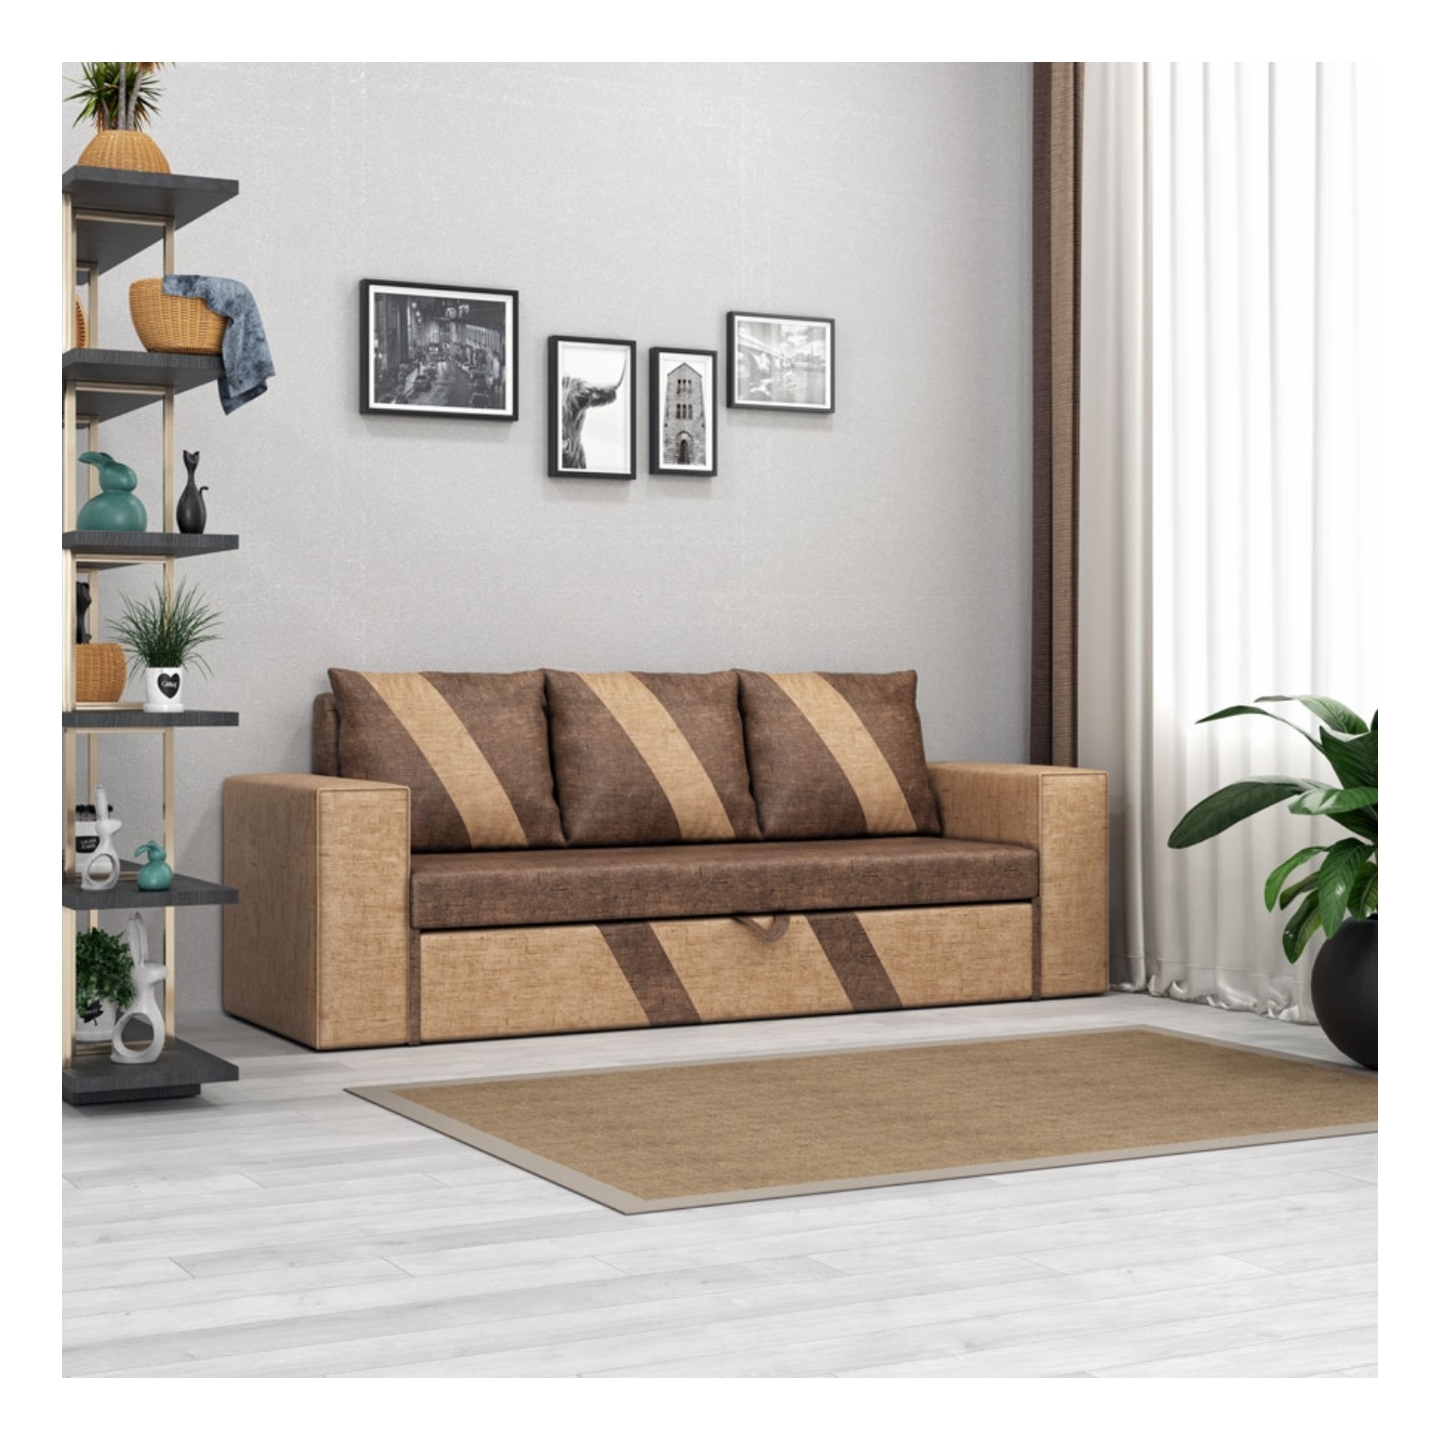 RLF Sofa Cam Bed New Design In Brown Colour